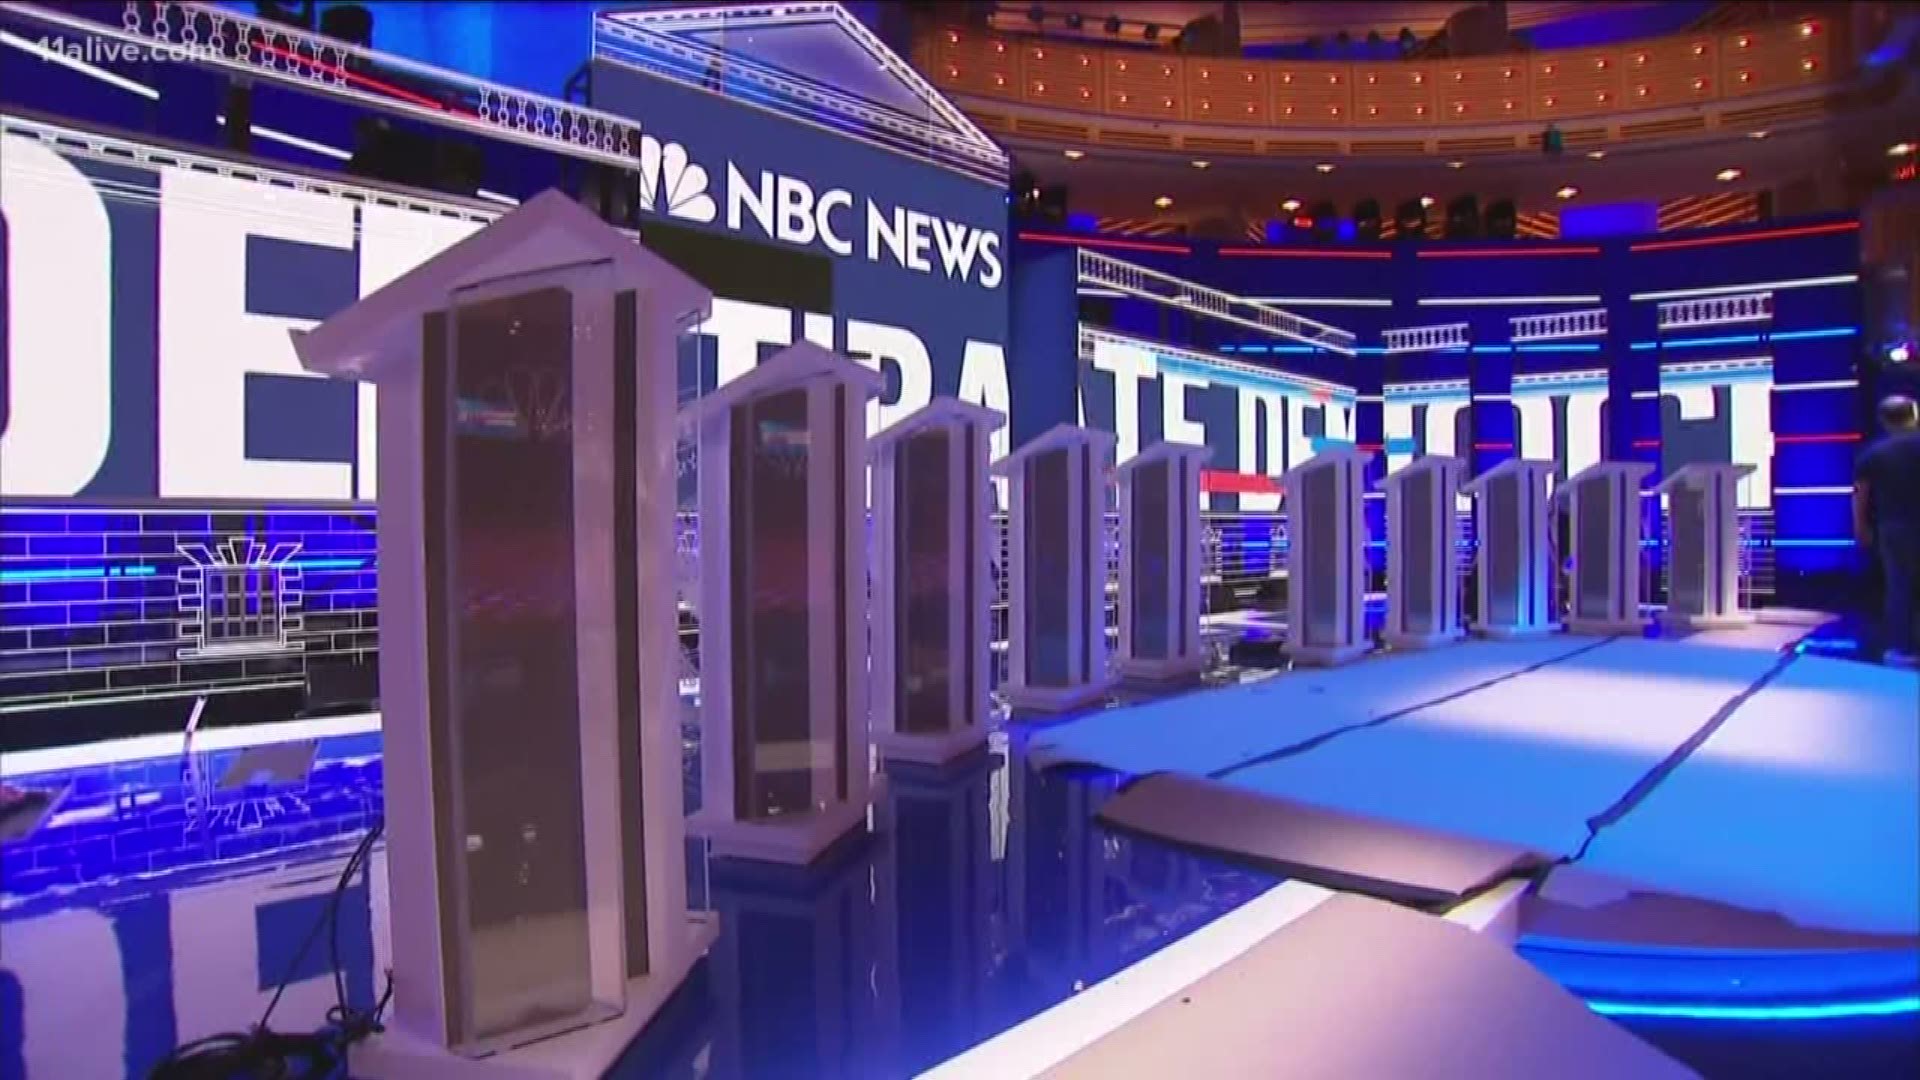 The debates will be held between 20 candidates over two nights in Miami, beginning Wednesday night.